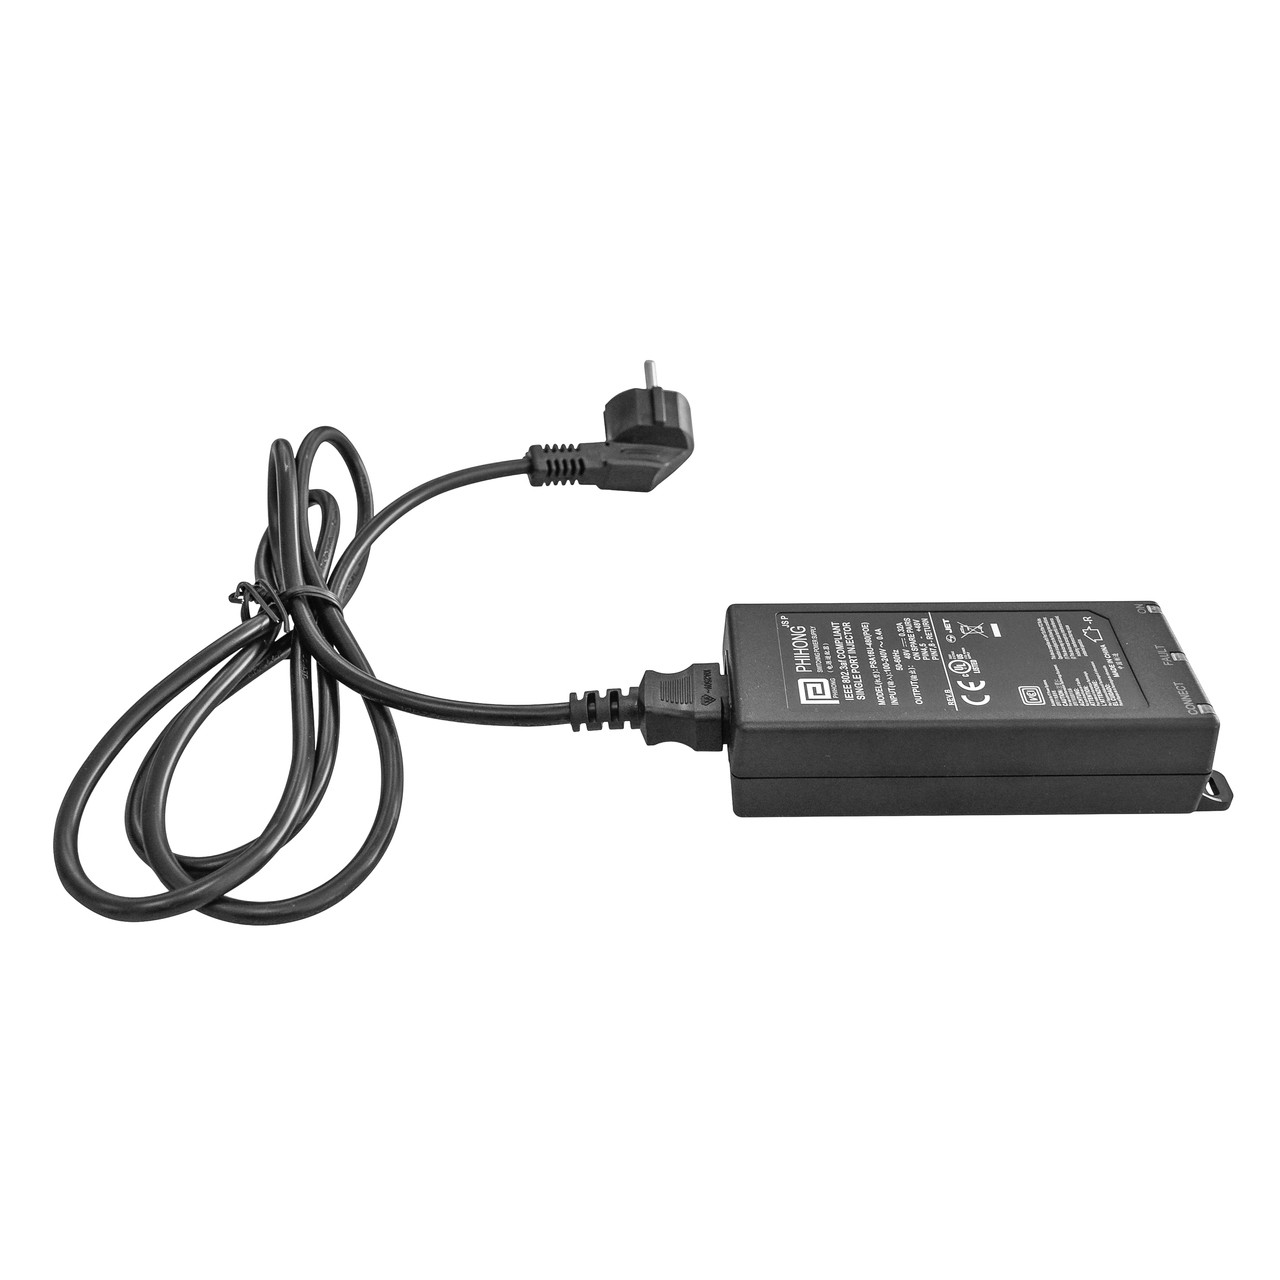 Power over Ethernet (PoE) Injector, overloaded circuits poe